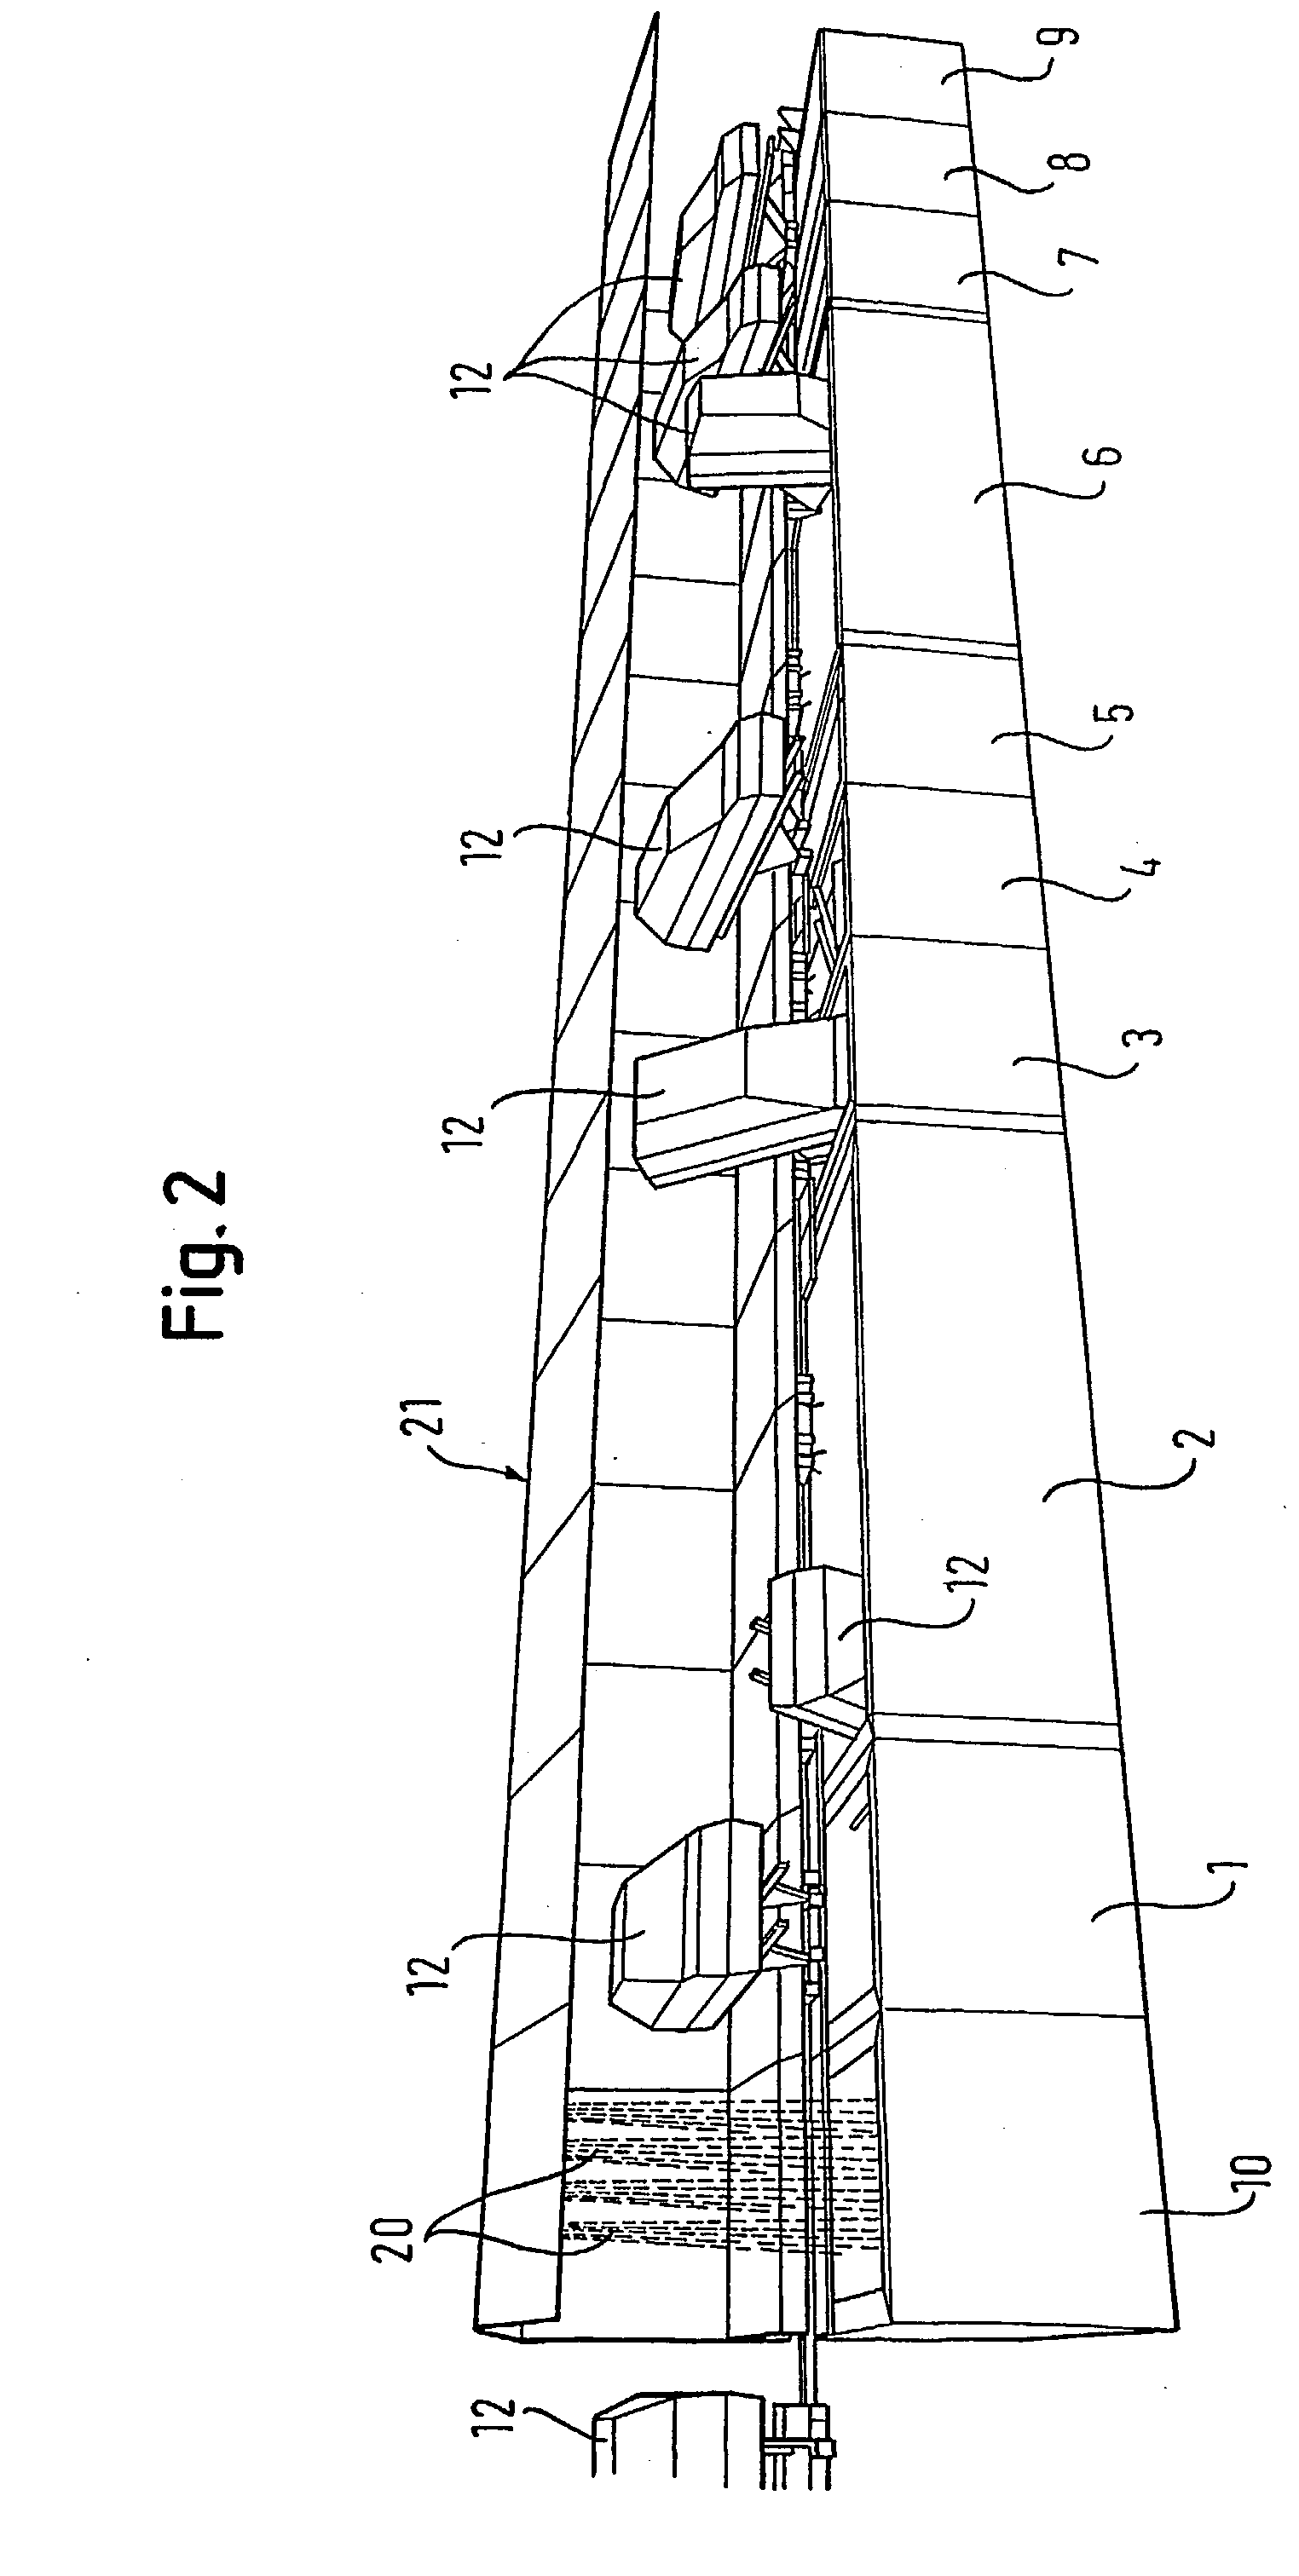 Device and method for the surface treatment of workpieces